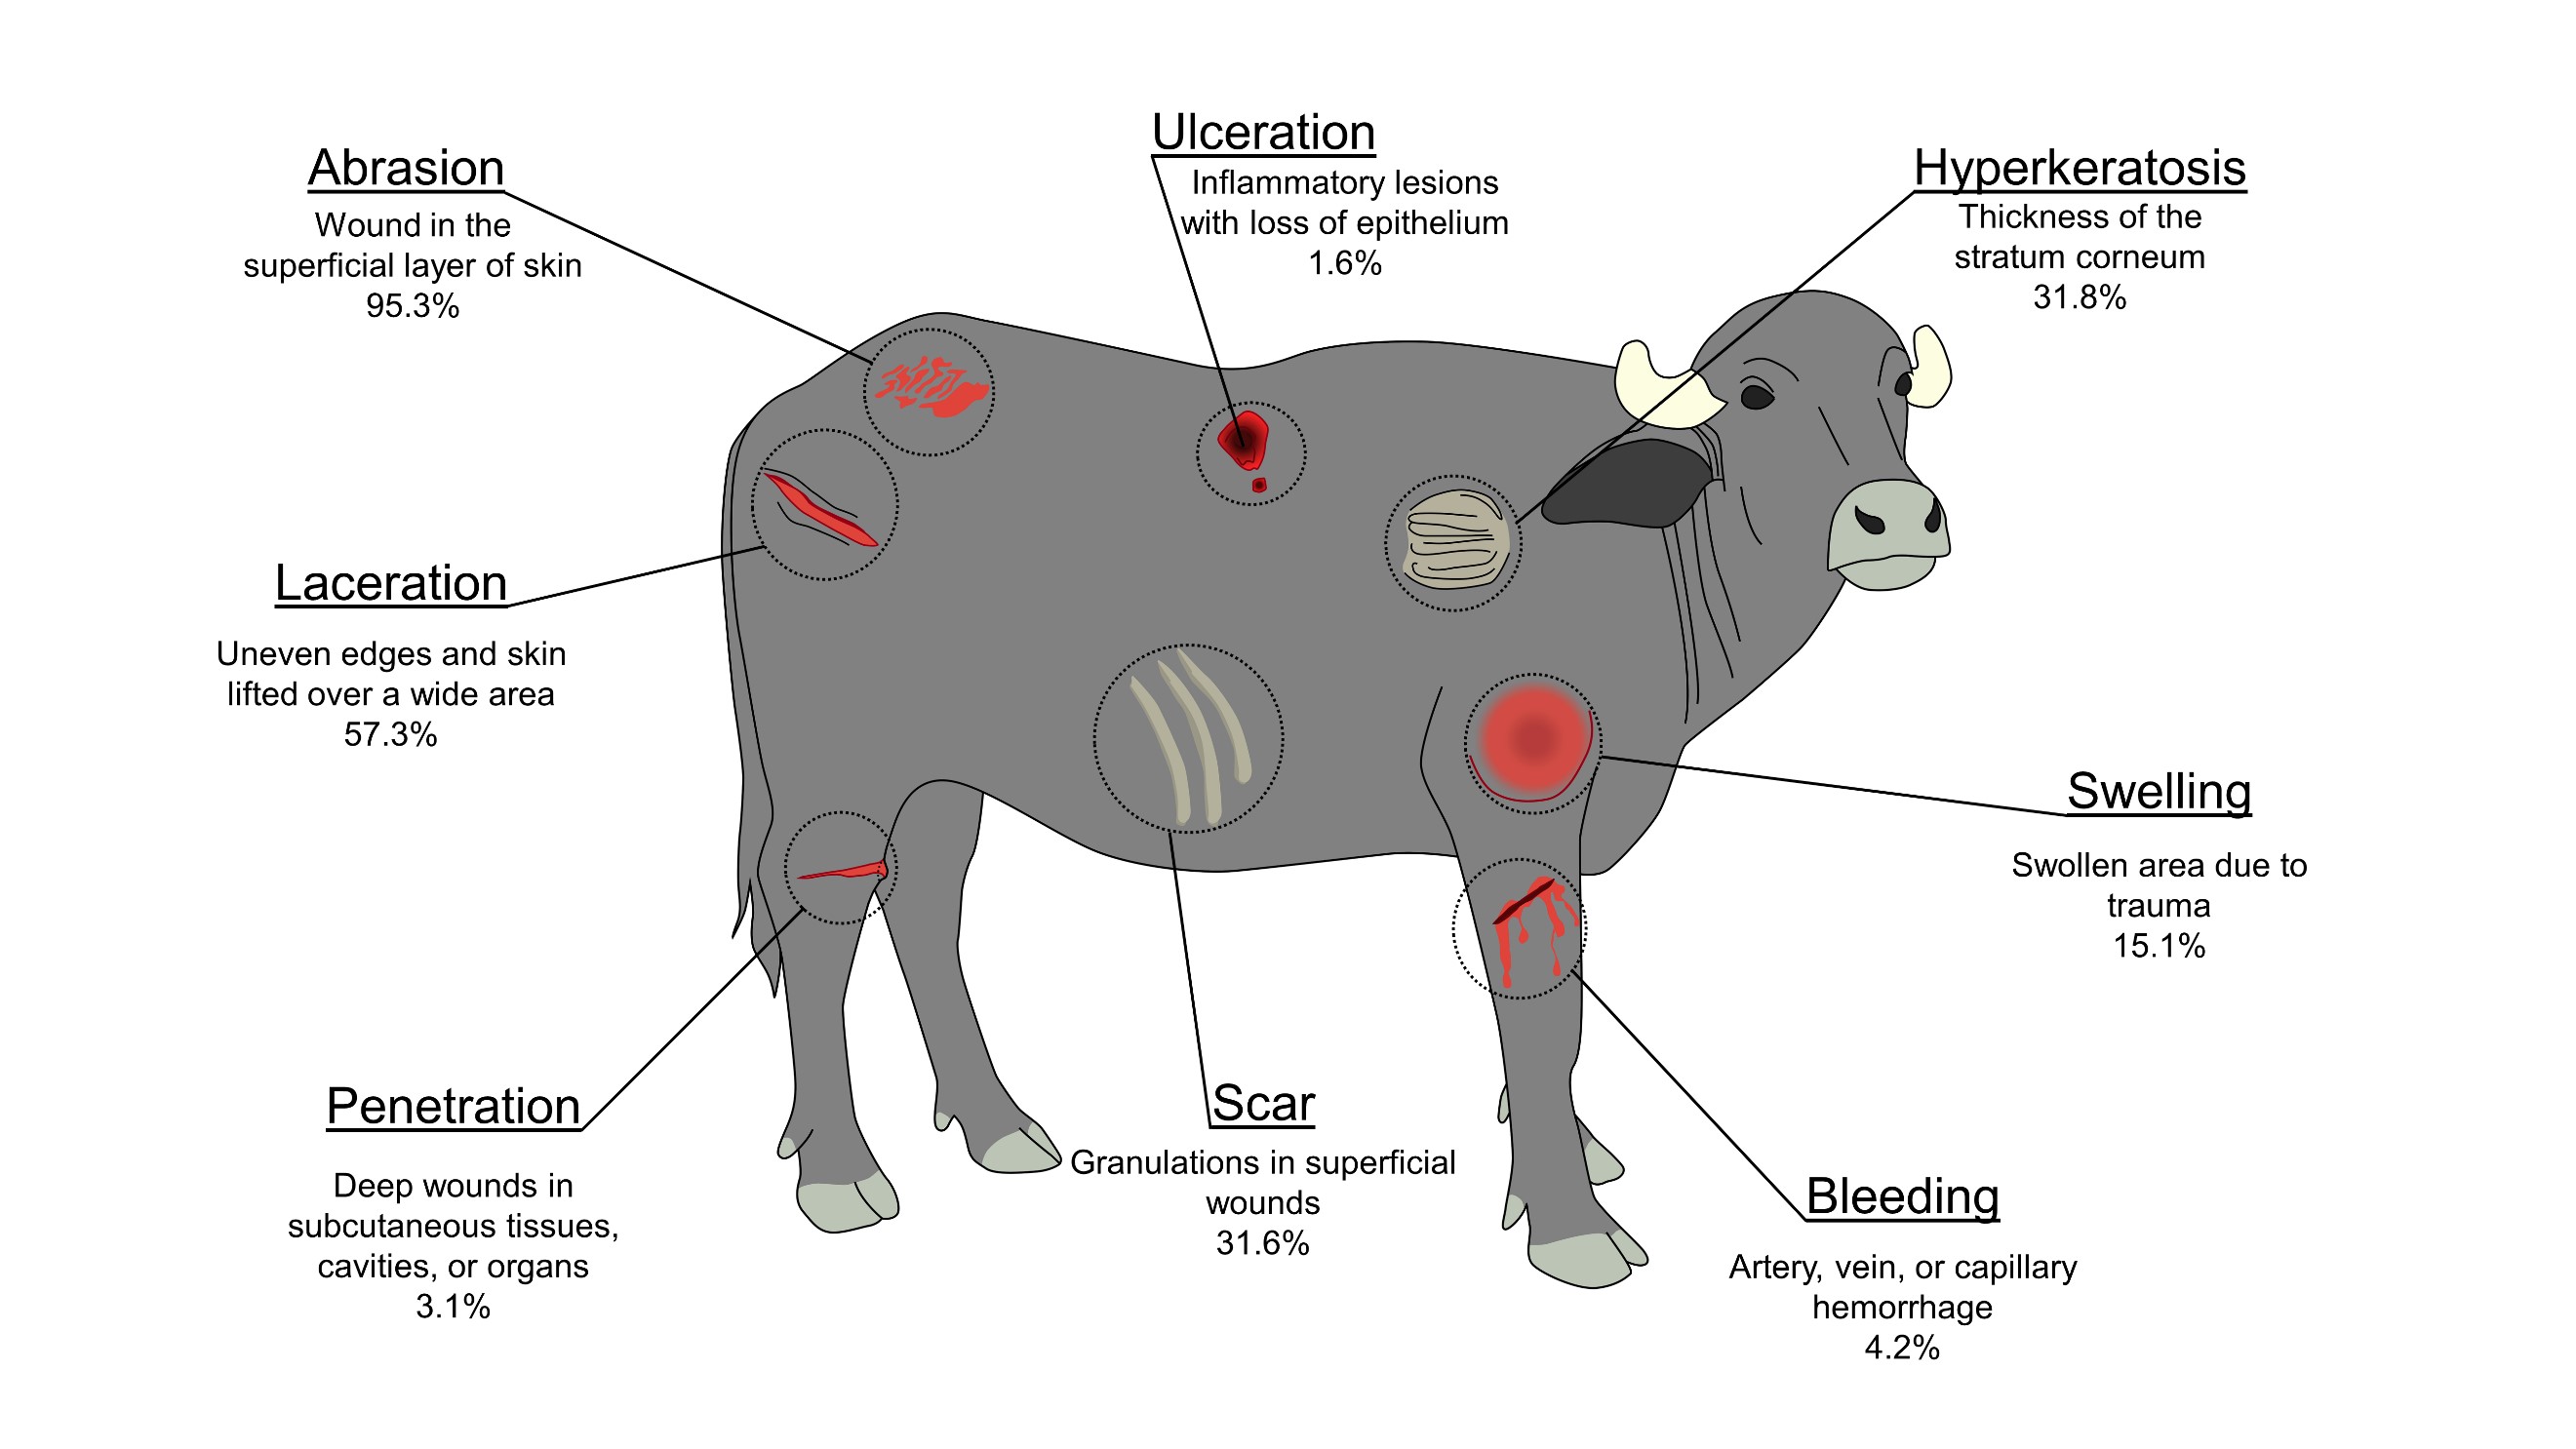 Frequency (in percentages) of eight types of skin injuries in water buffaloes (B. bubalis) during transport. Information from Alam et al's classification (2010b).